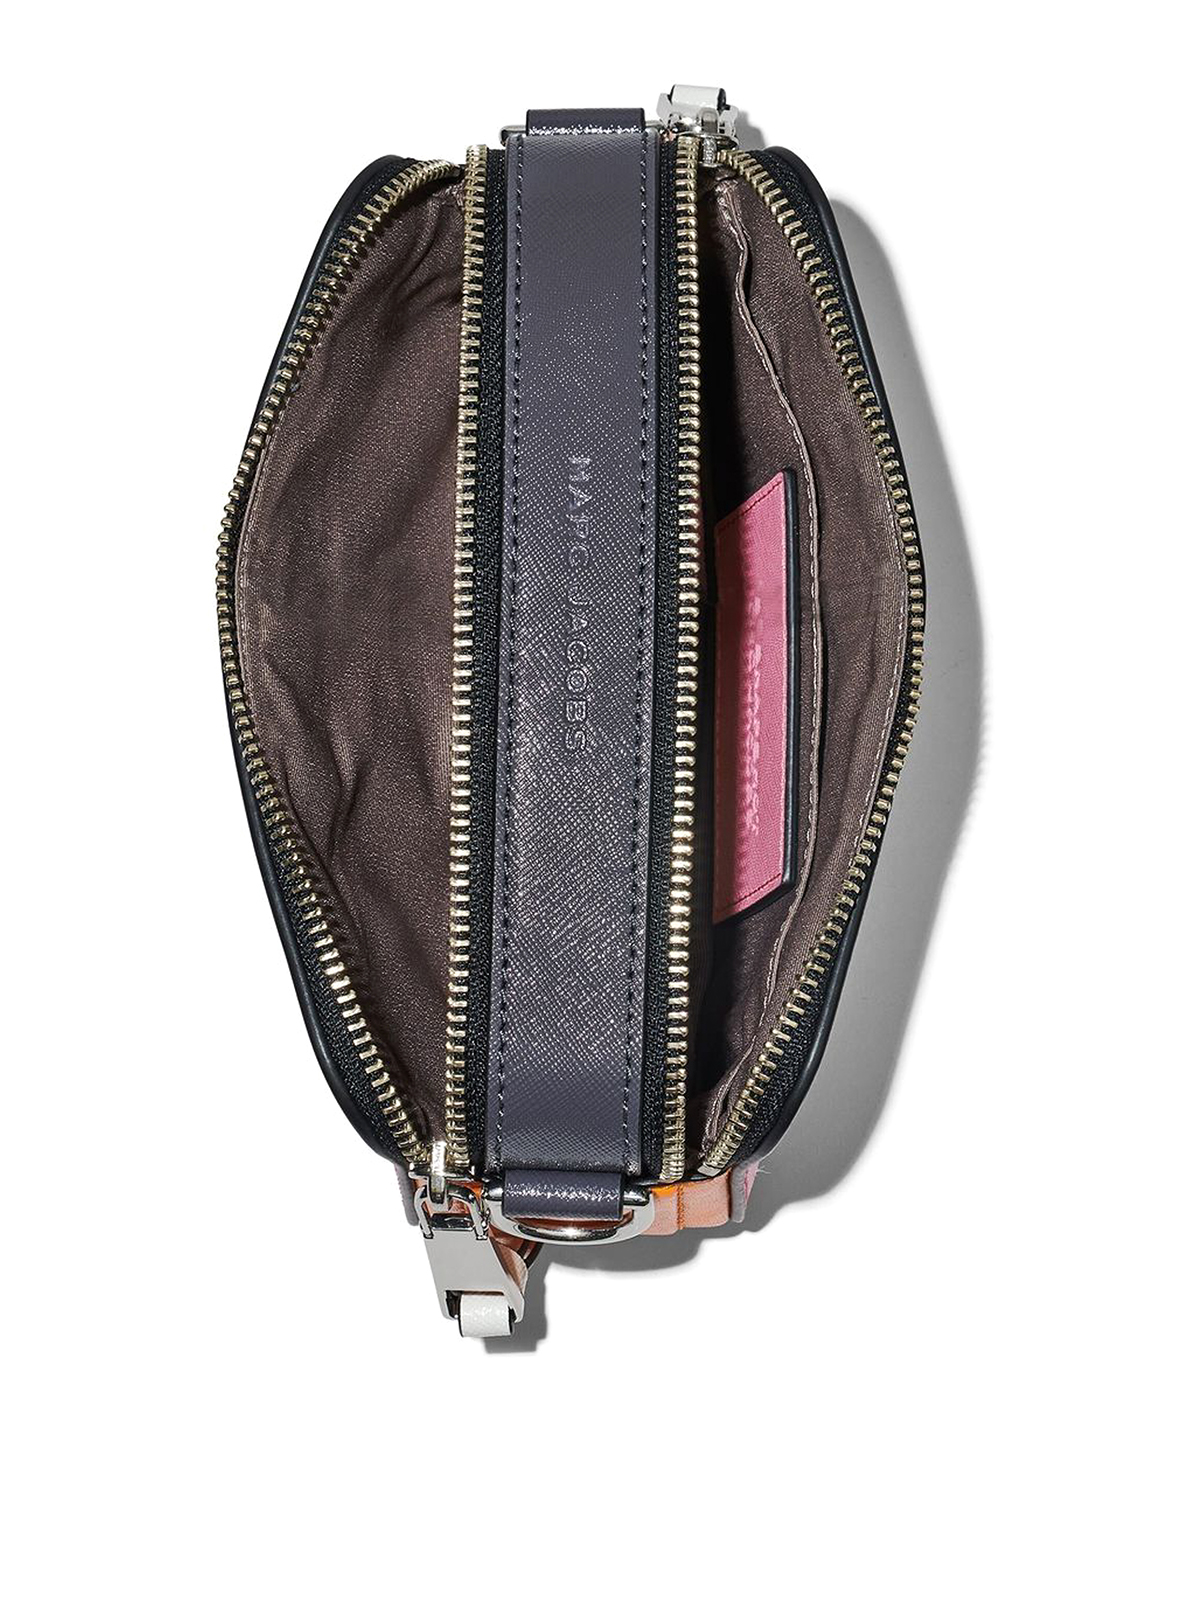 Snapshot of Marc Jacobs - Grey and pink leather bag with zippers and  shoulder strap for women